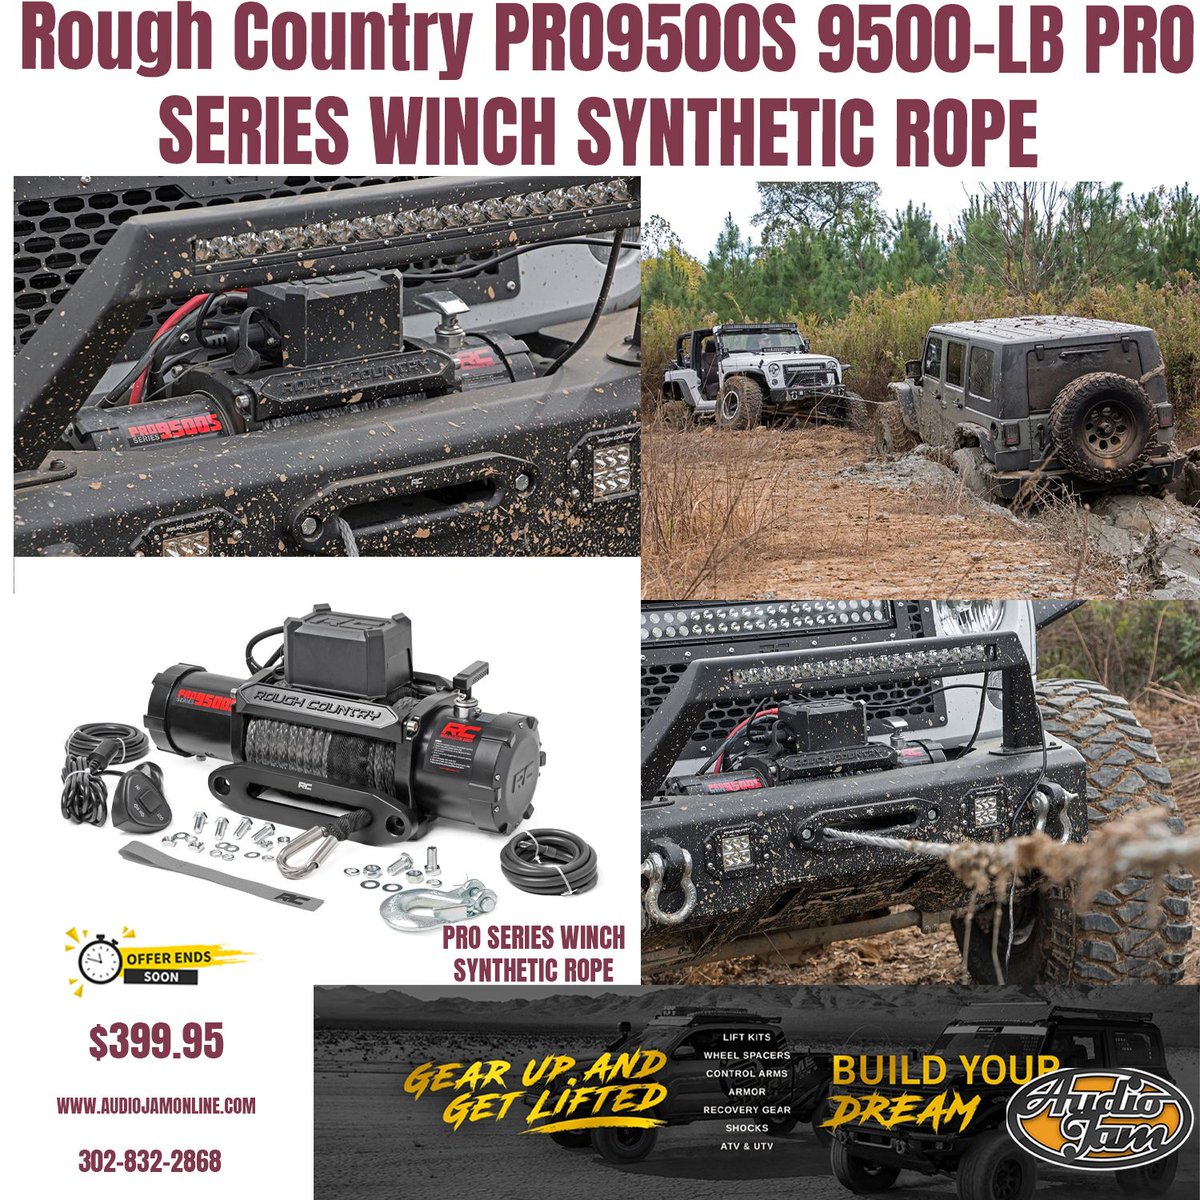 Learn more at: buff.ly/3rG2Wc8
Contact us at 302-832-2868 to book an appointment 

#roughcountry #winchesterva #winchester #winchesterky #winchchallenge